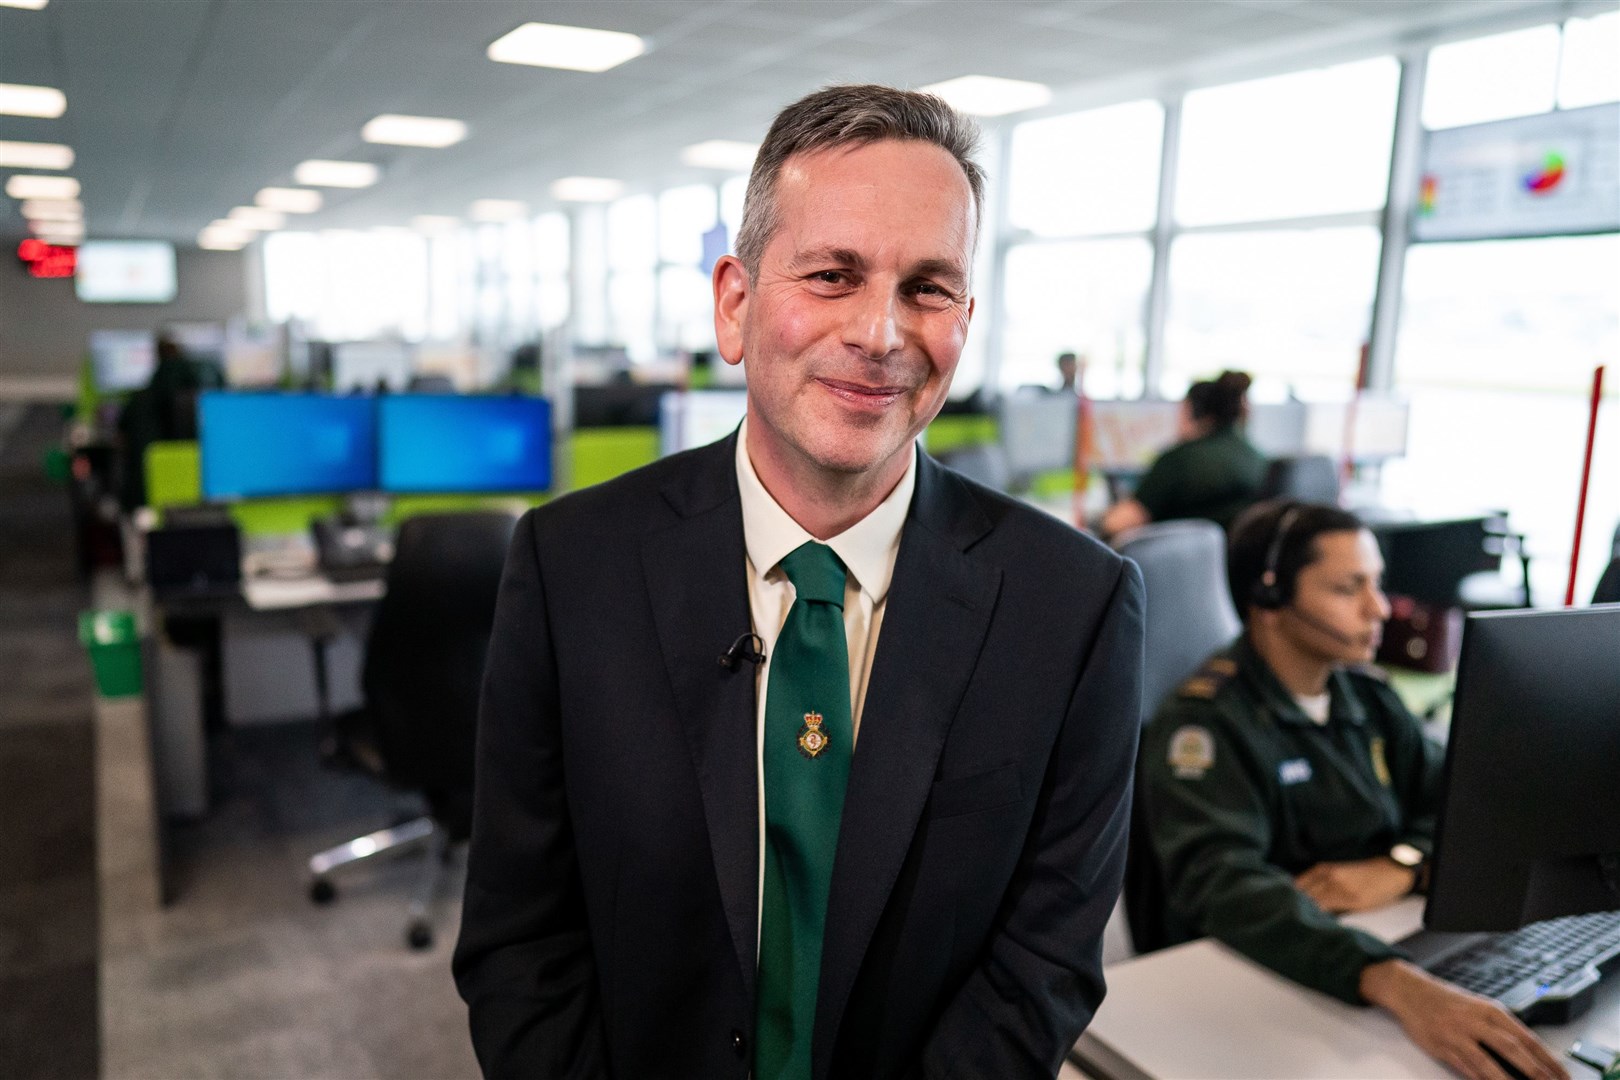 Daniel Elkeles, chief executive of the London Ambulance Service, speaks to the media at the LAS emergency operations centre in Newham, east London (Aaron Chown/PA)